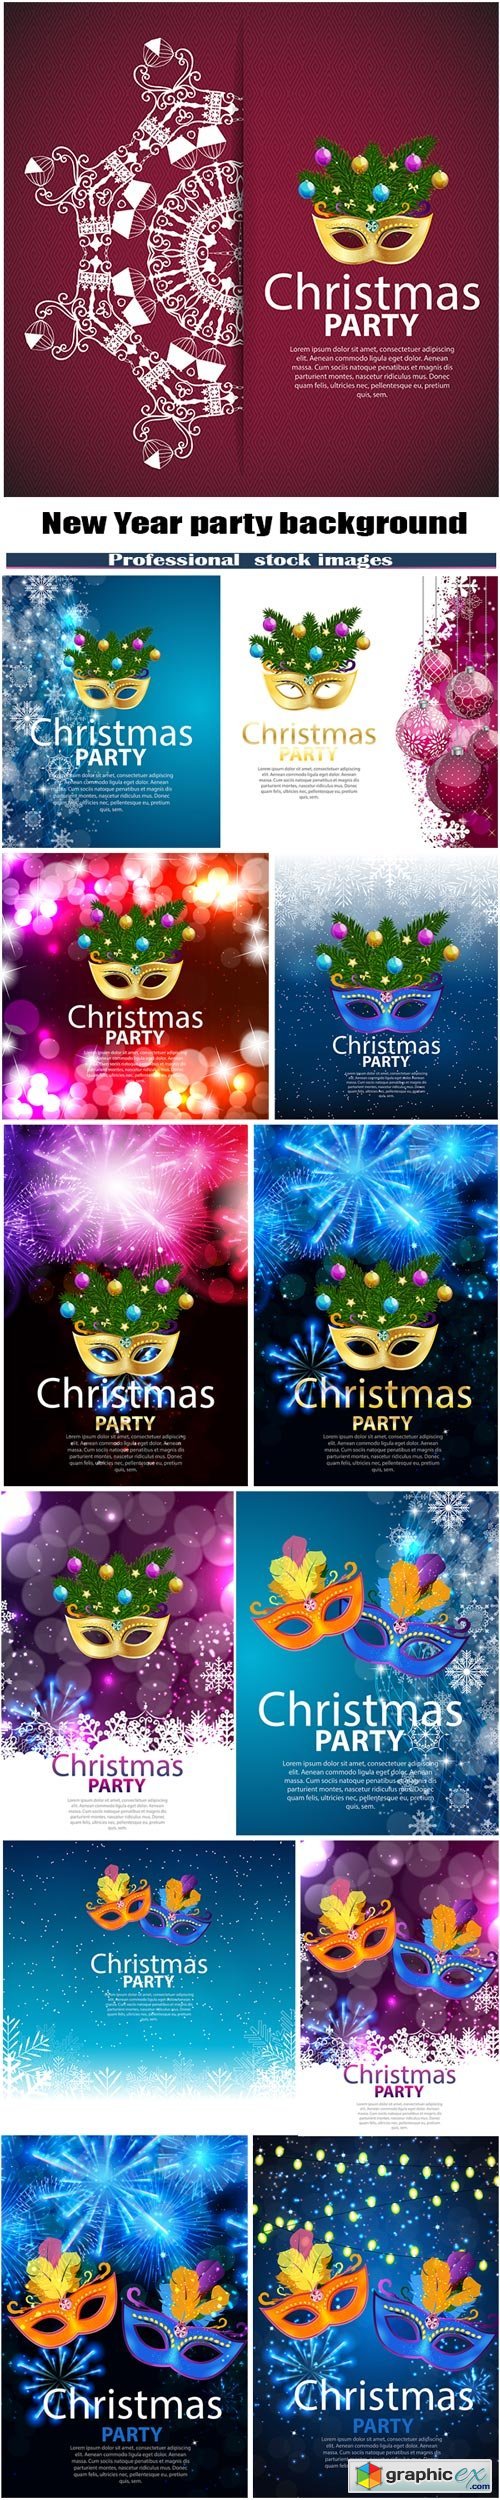 Beauty Merry Christmas and New Year party background